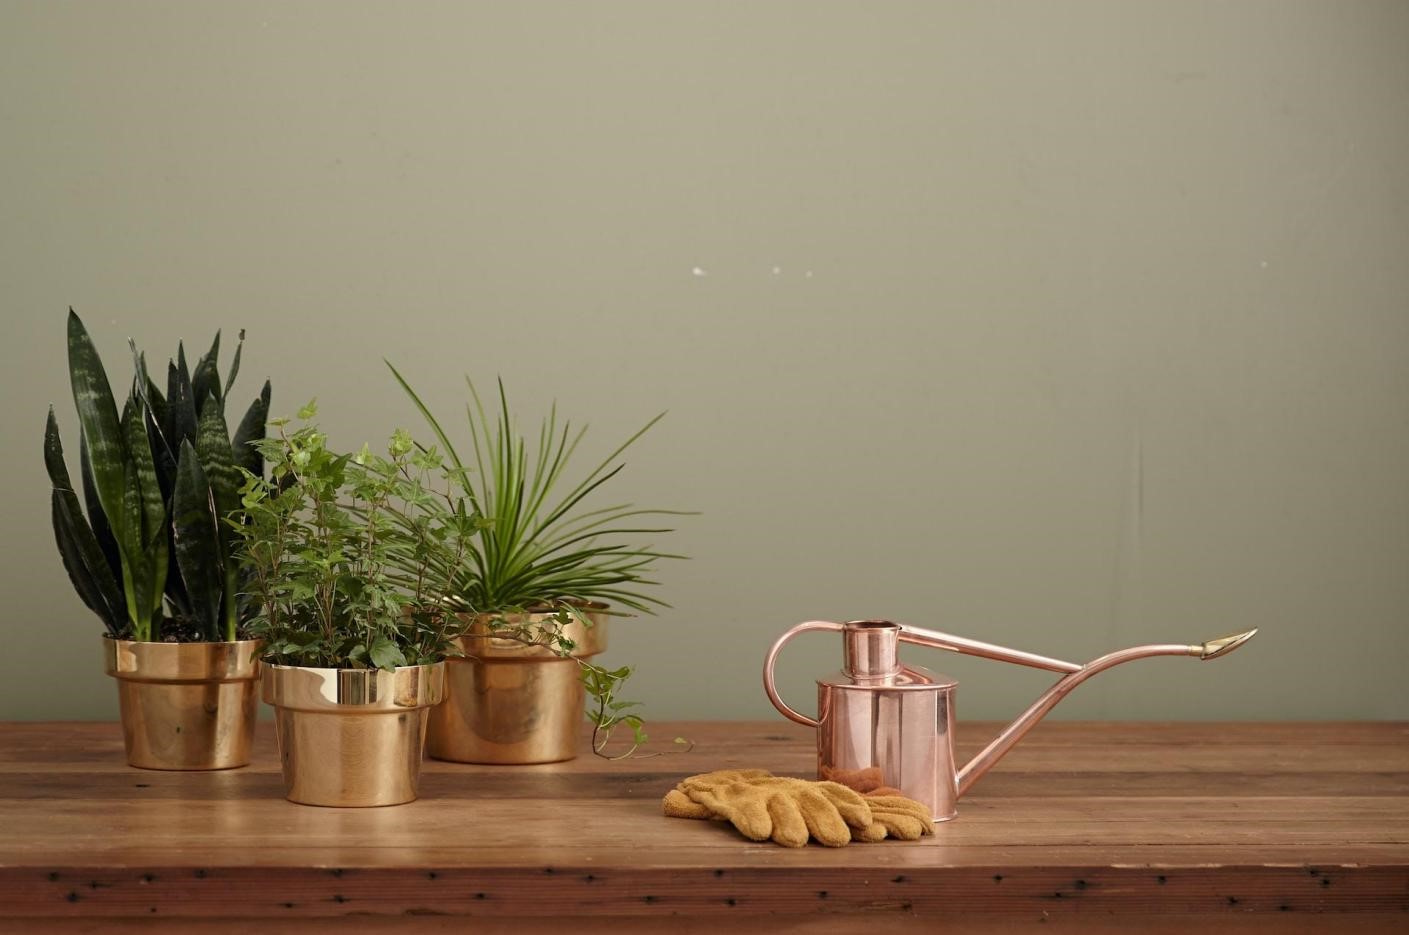 A brass-colored watering can with plants next to it